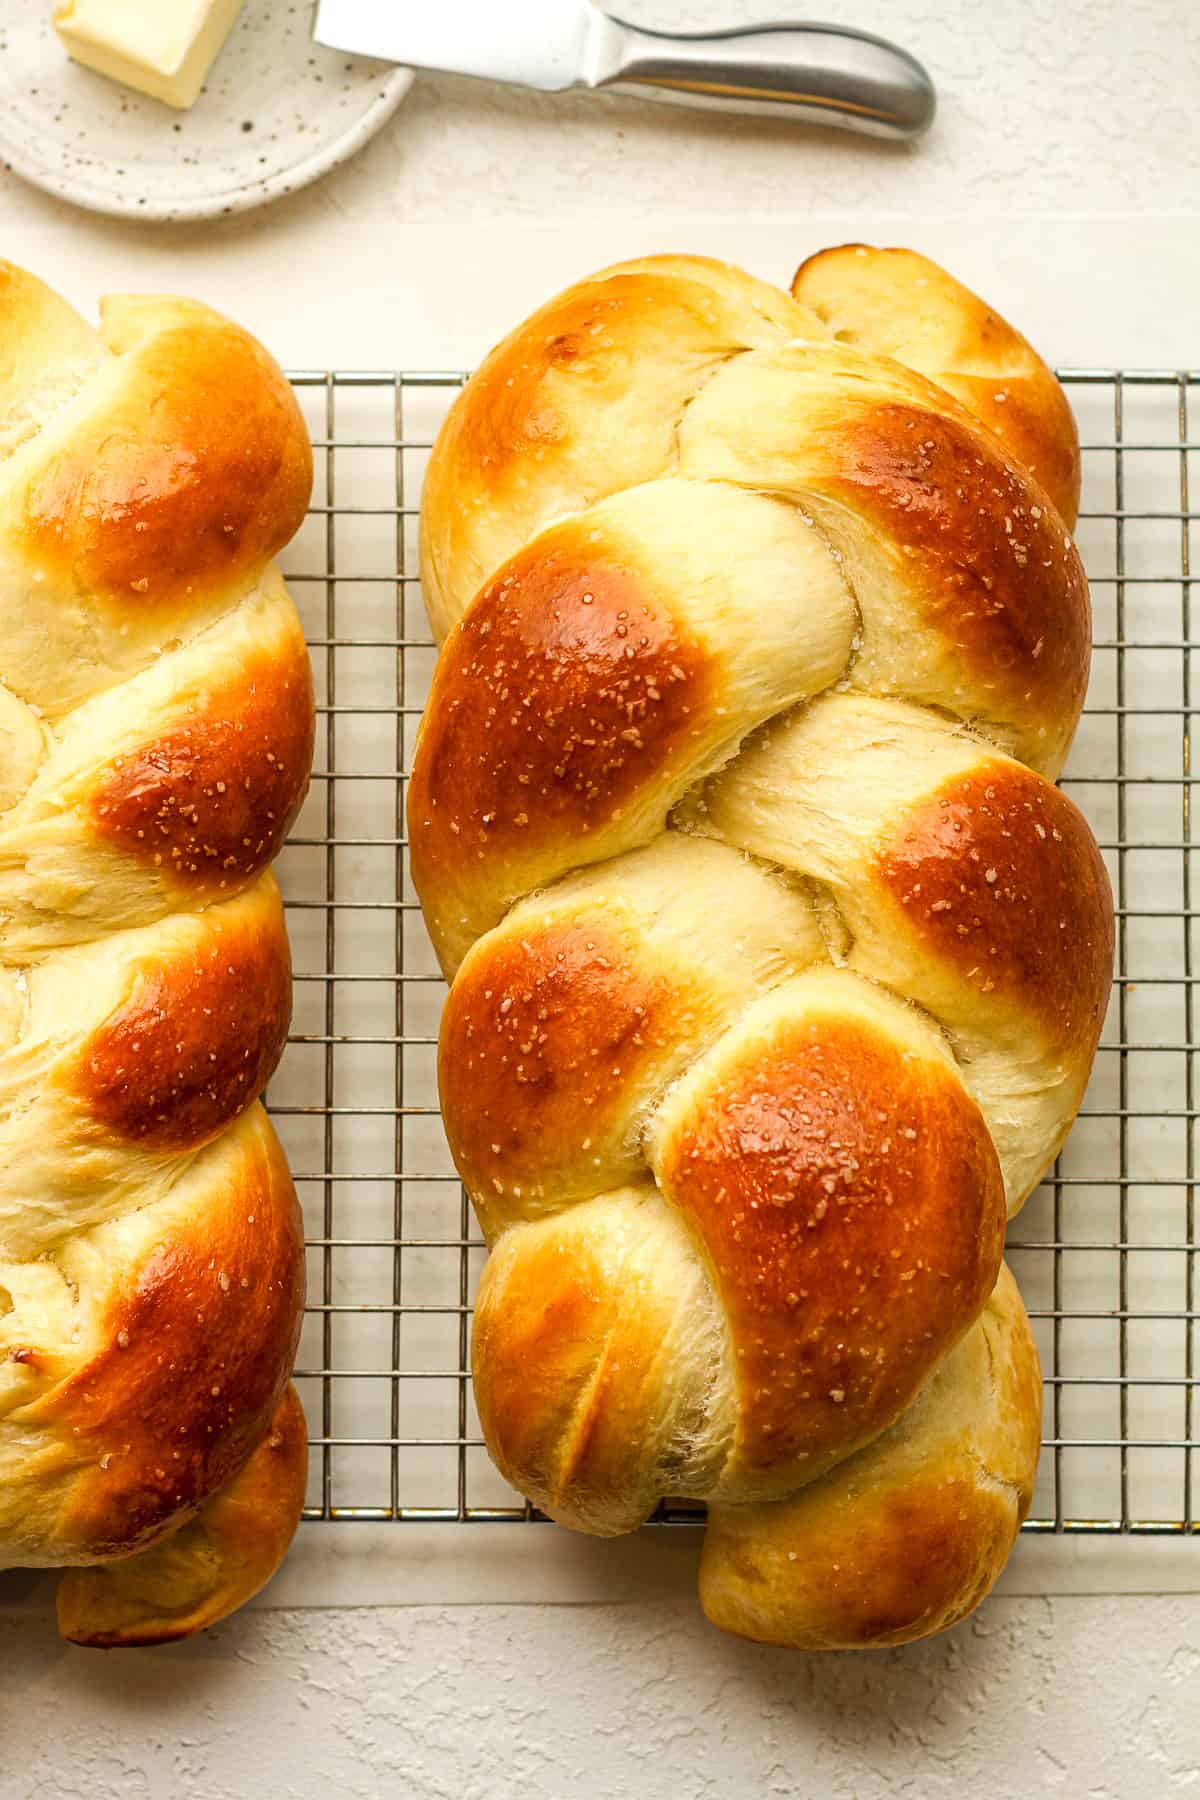 Two loaves of braided brioche bread on a wire rack.